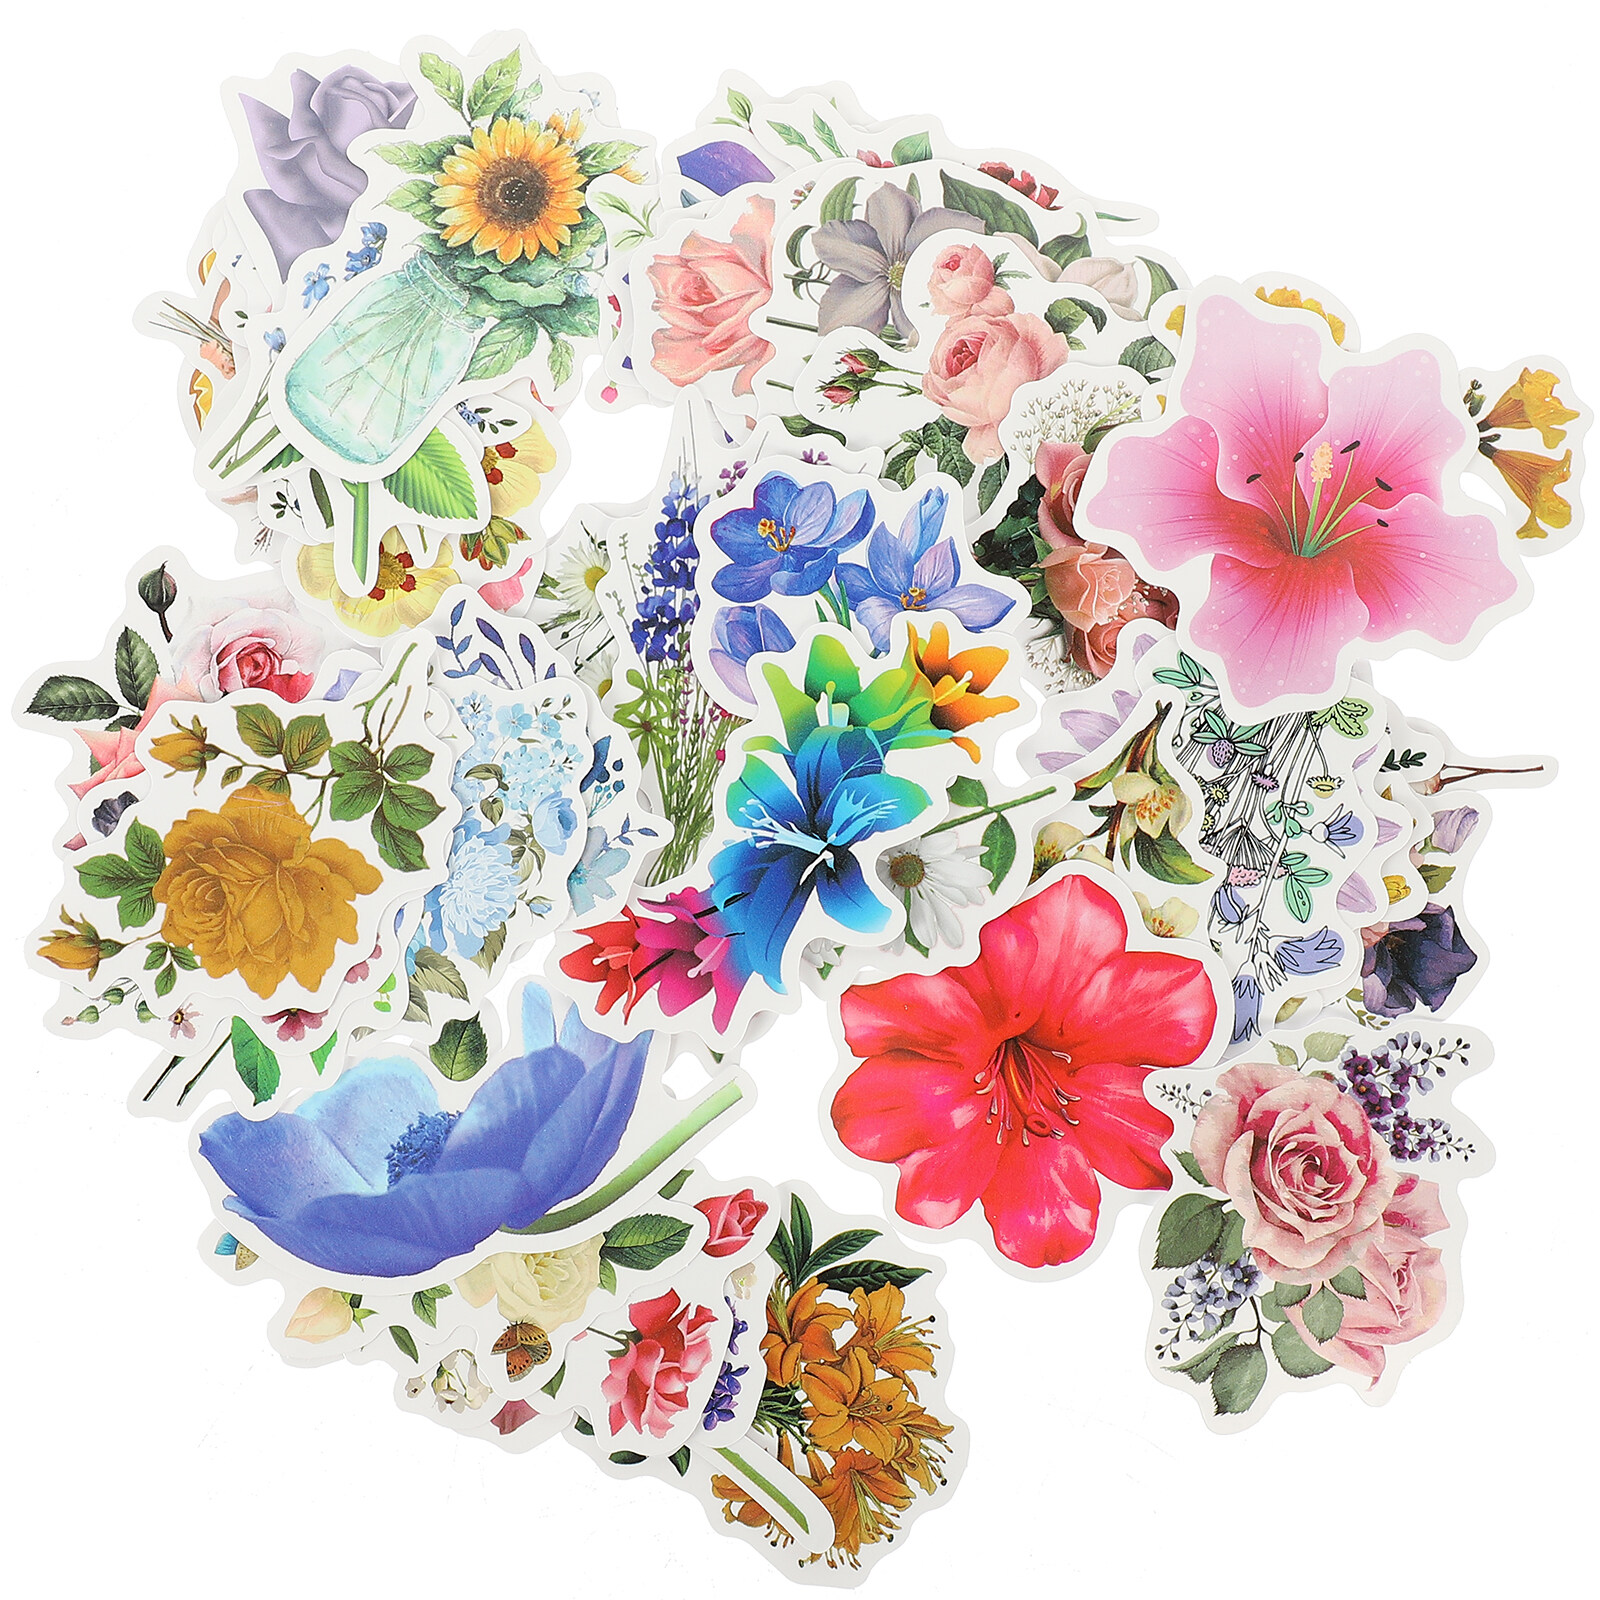 100pcs Flower Stickers Laptop Floral Decals Scrapbook Skateboard Luggage Stickers, Size: 5.7x5.6cm